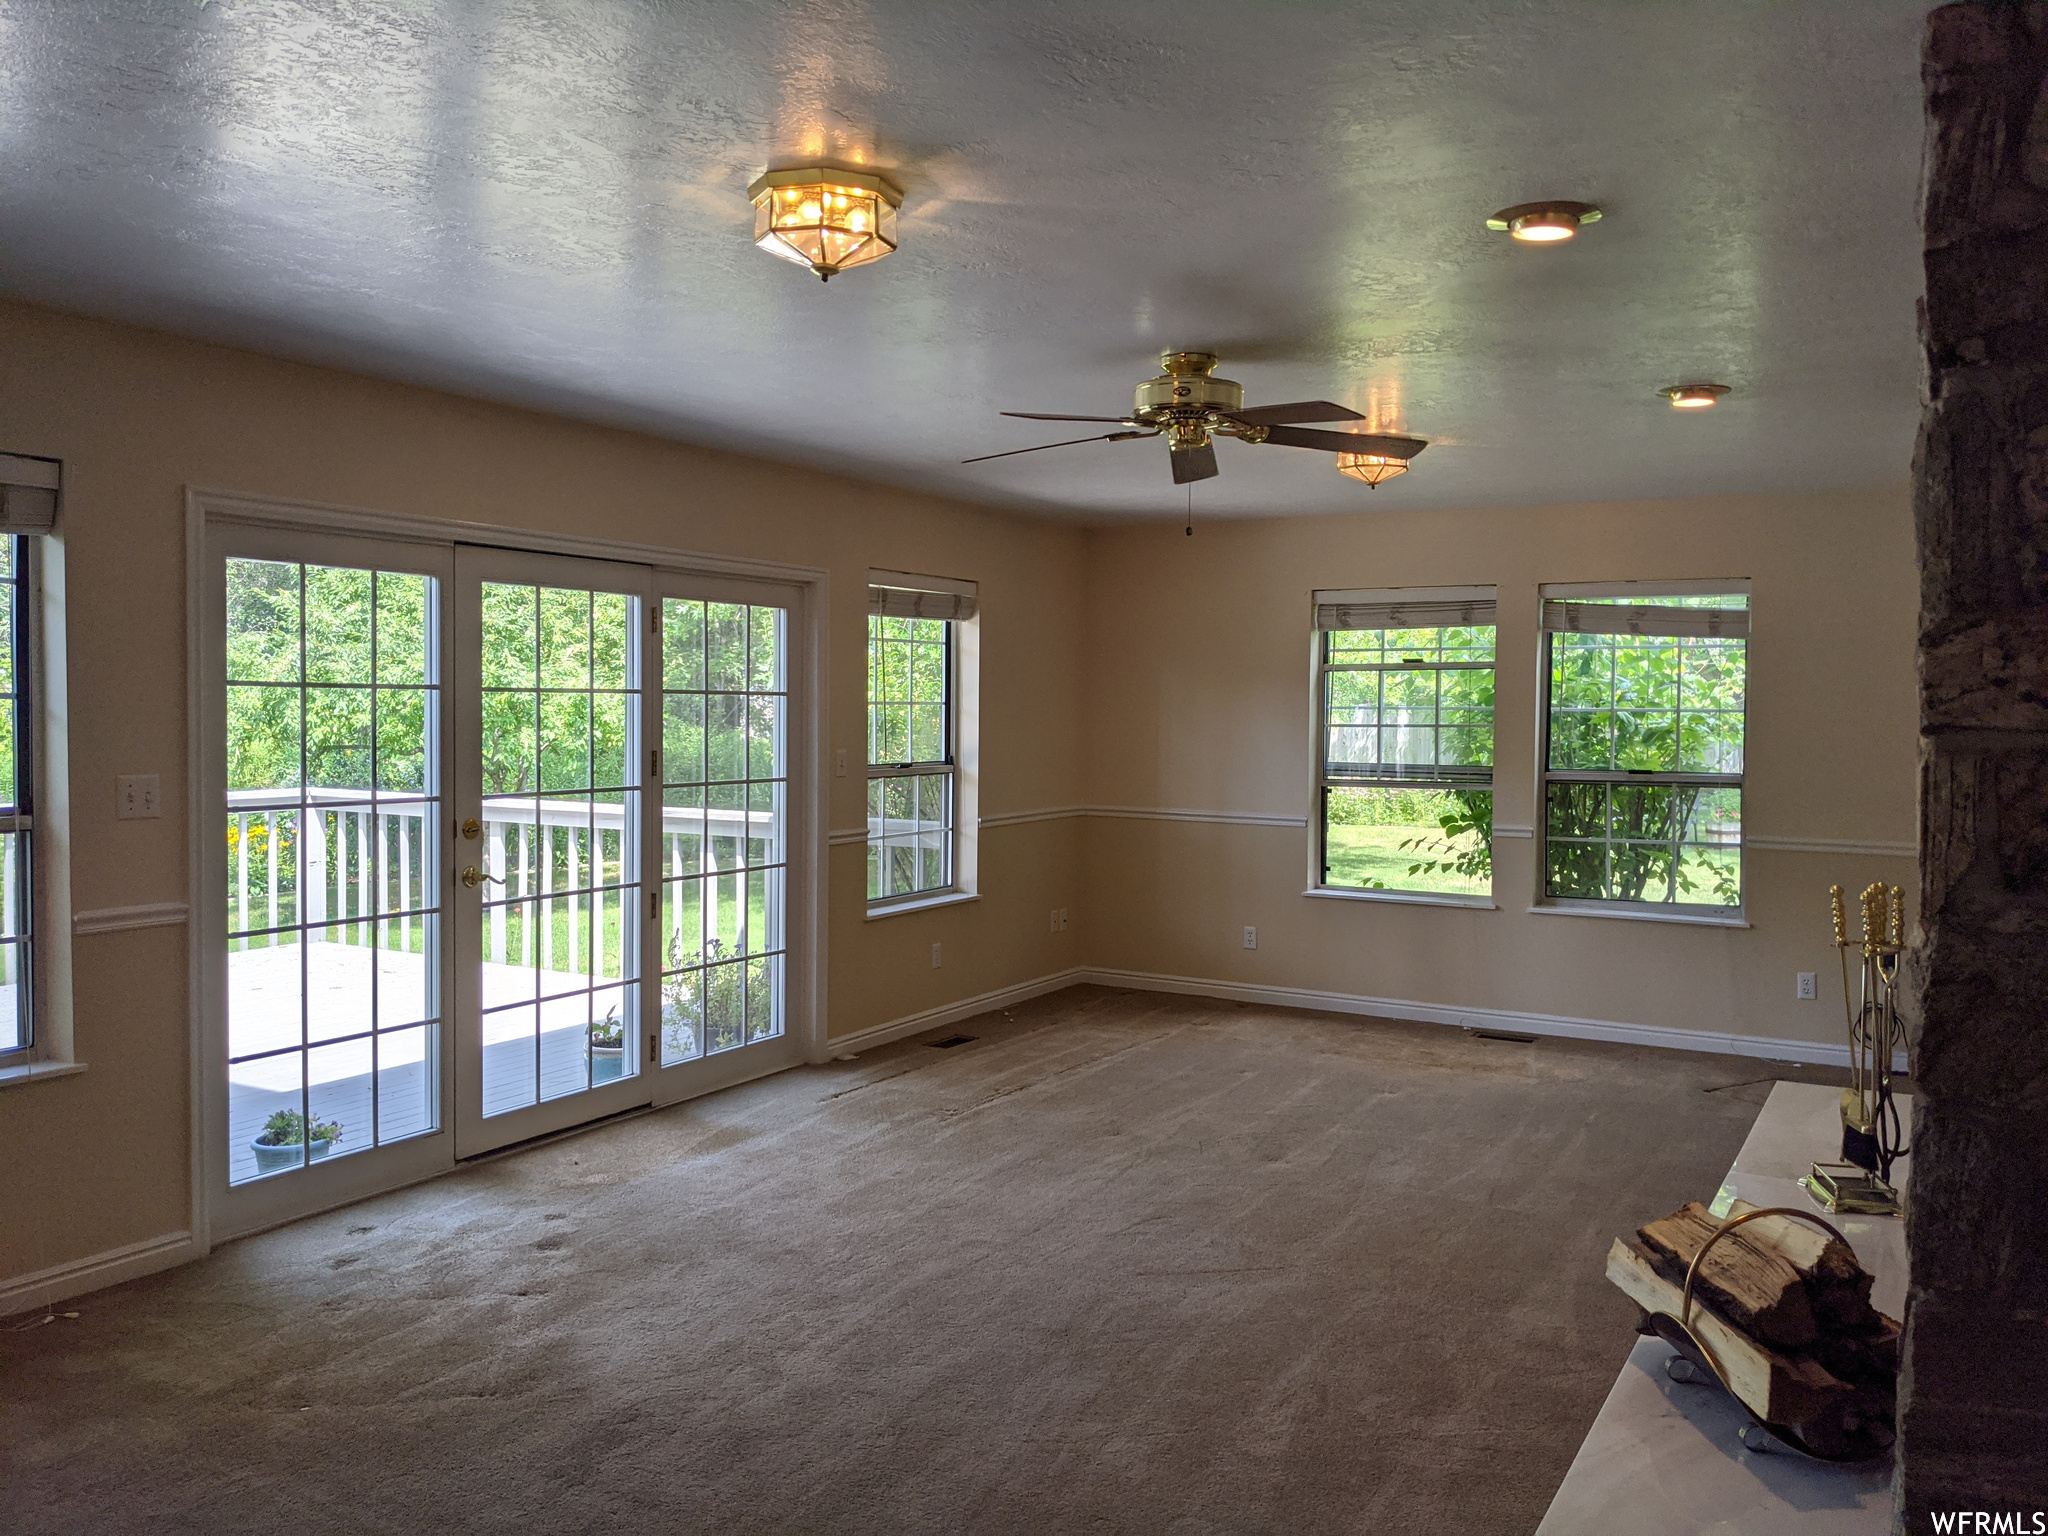 Carpeted living room with ceiling fan and a textured ceiling